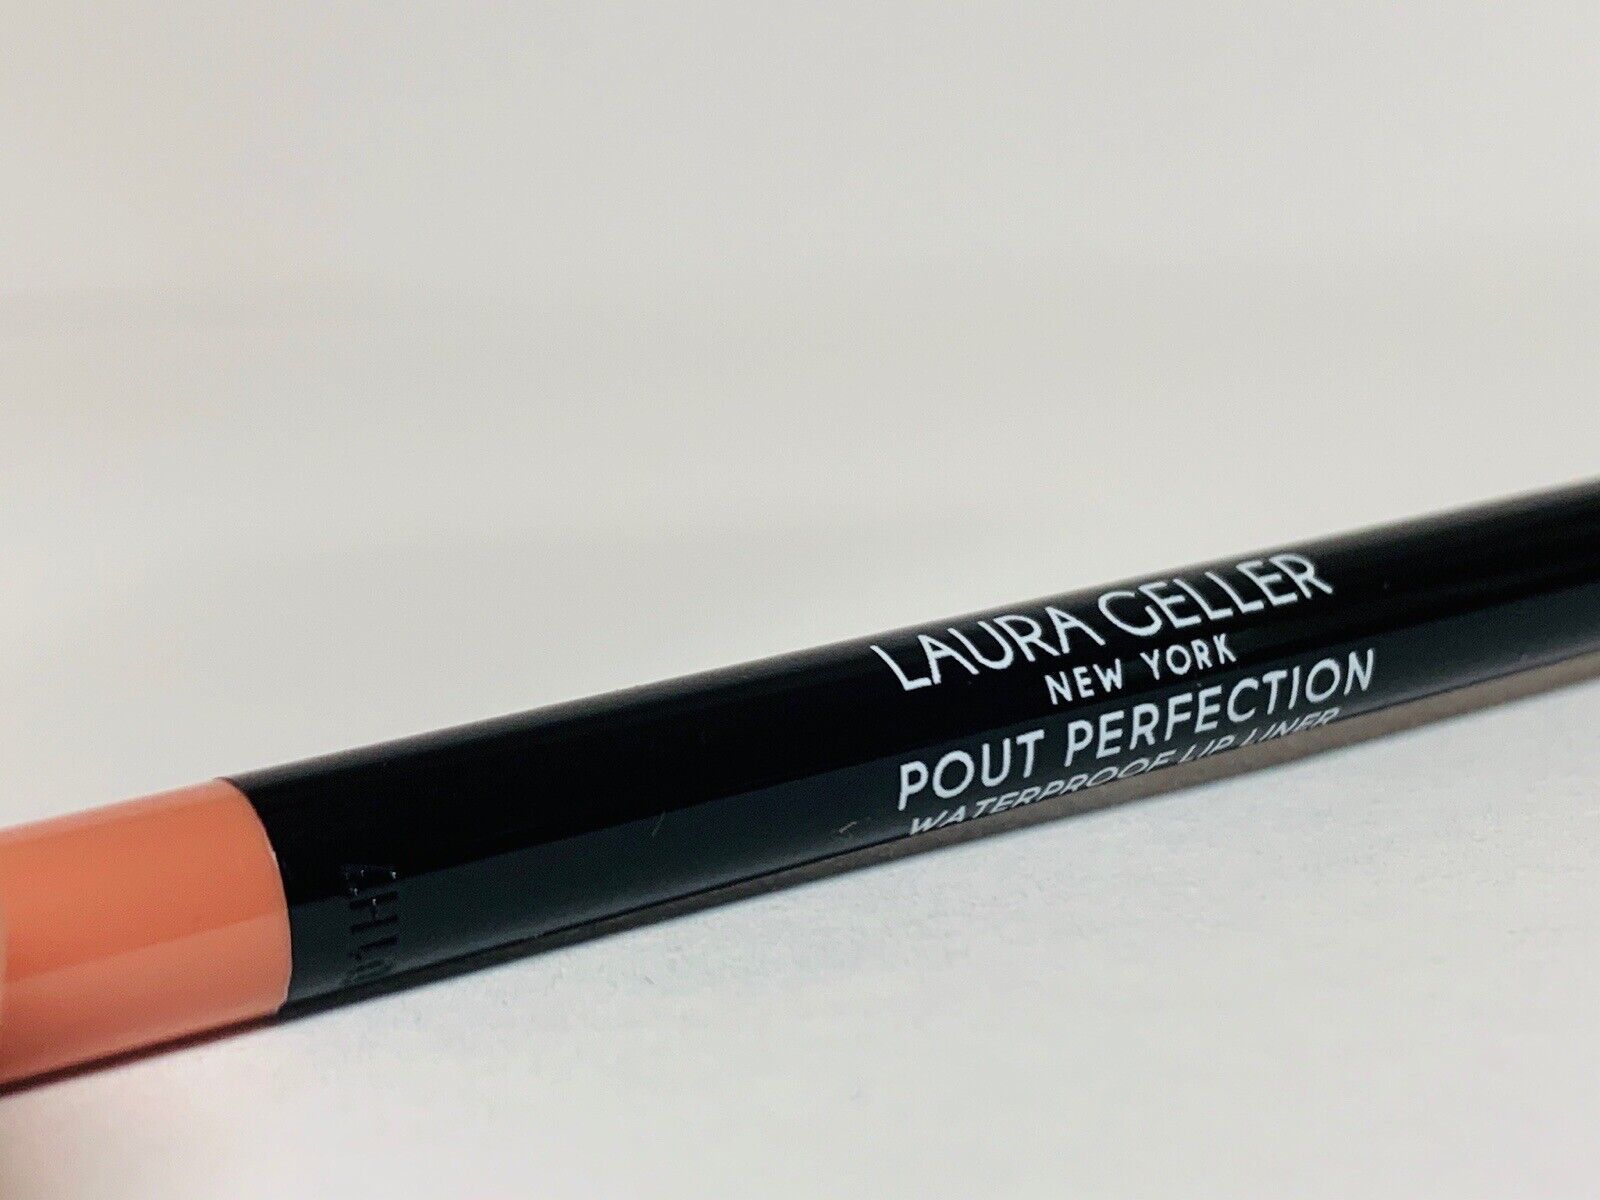 Laura Geller Pout Perfection Waterproof Lip Liner - Nude, 1.2g/.04oz Full Size - $18.74